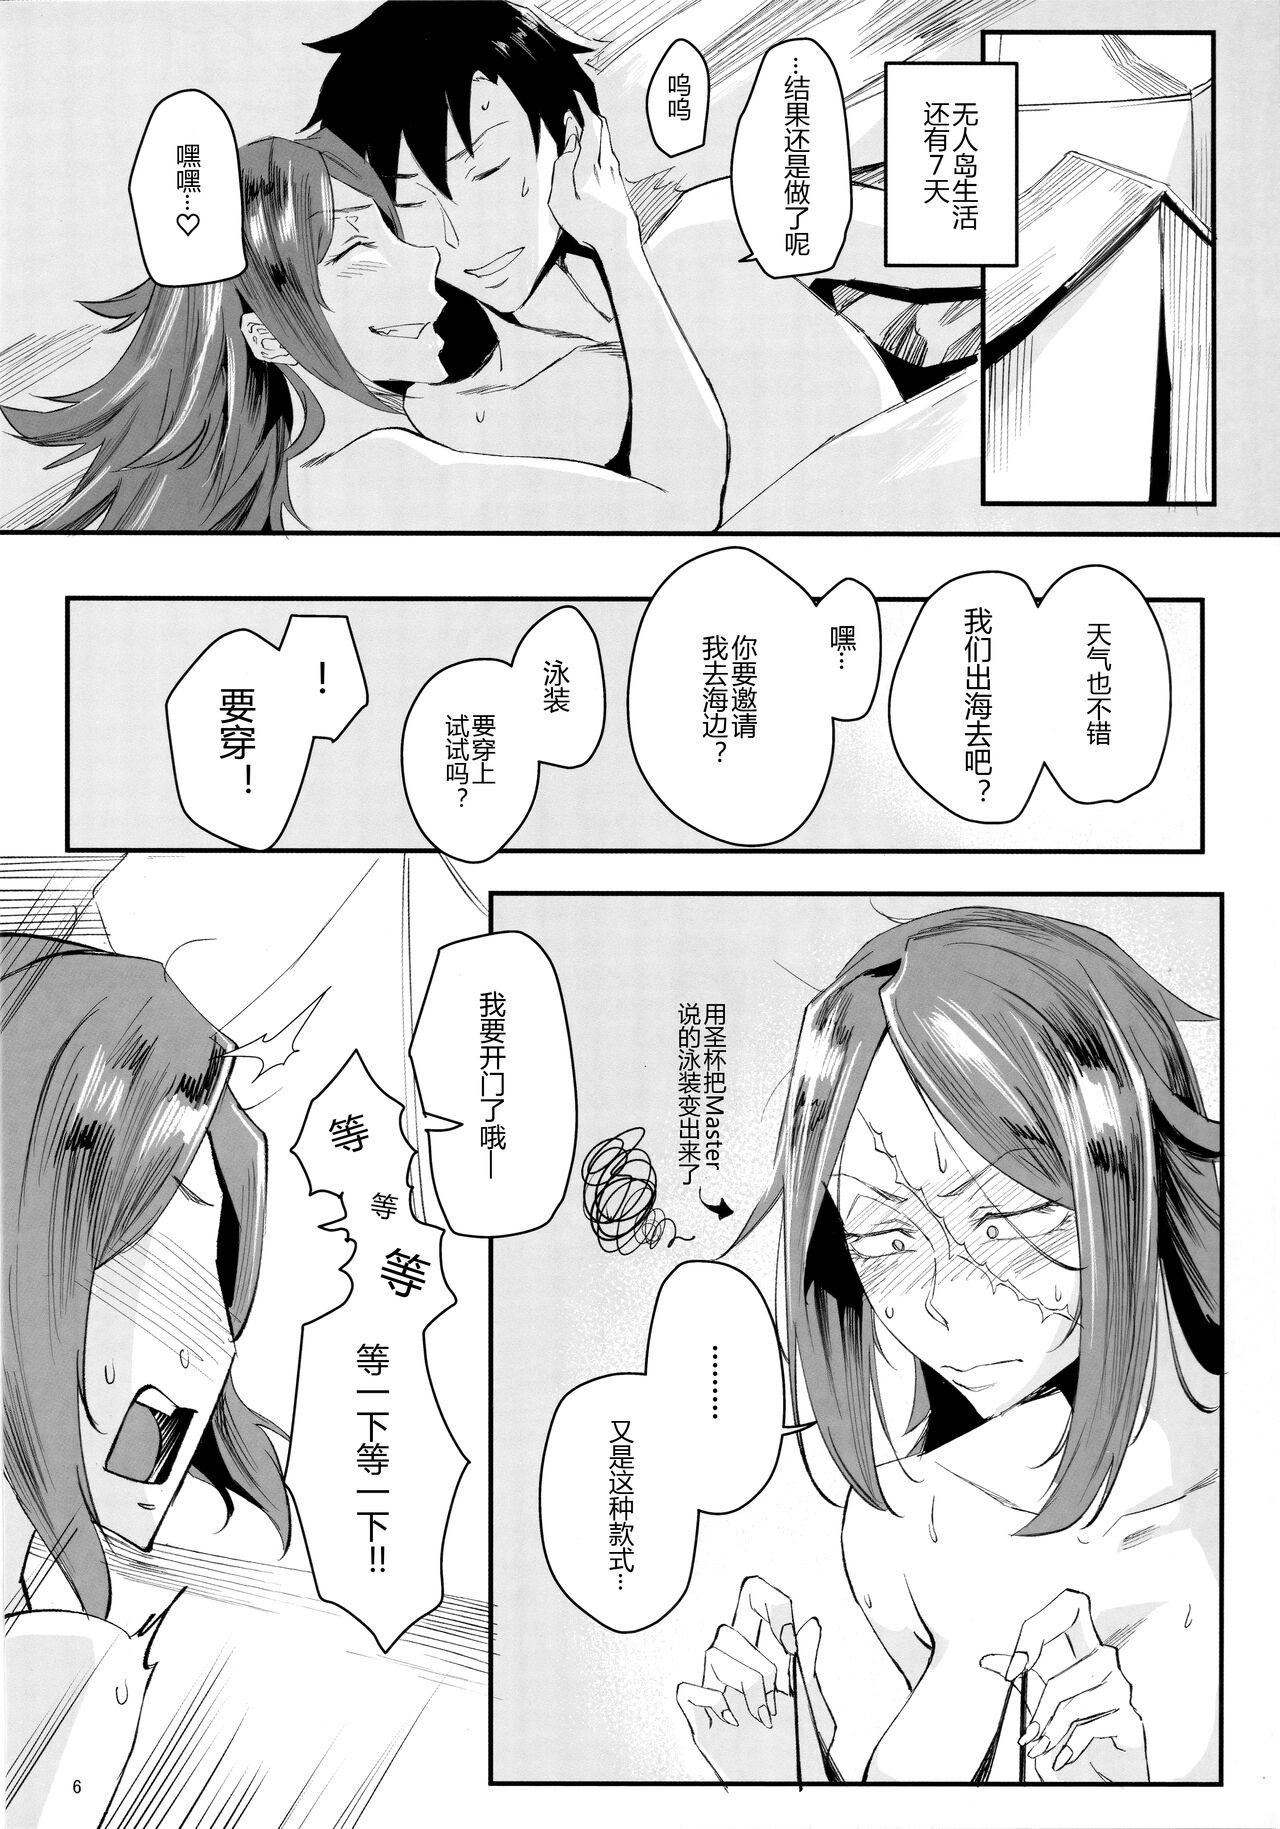 Face Fucking Yoi Drake san 7Days in Summer Island - Fate grand order Sexy - Page 6